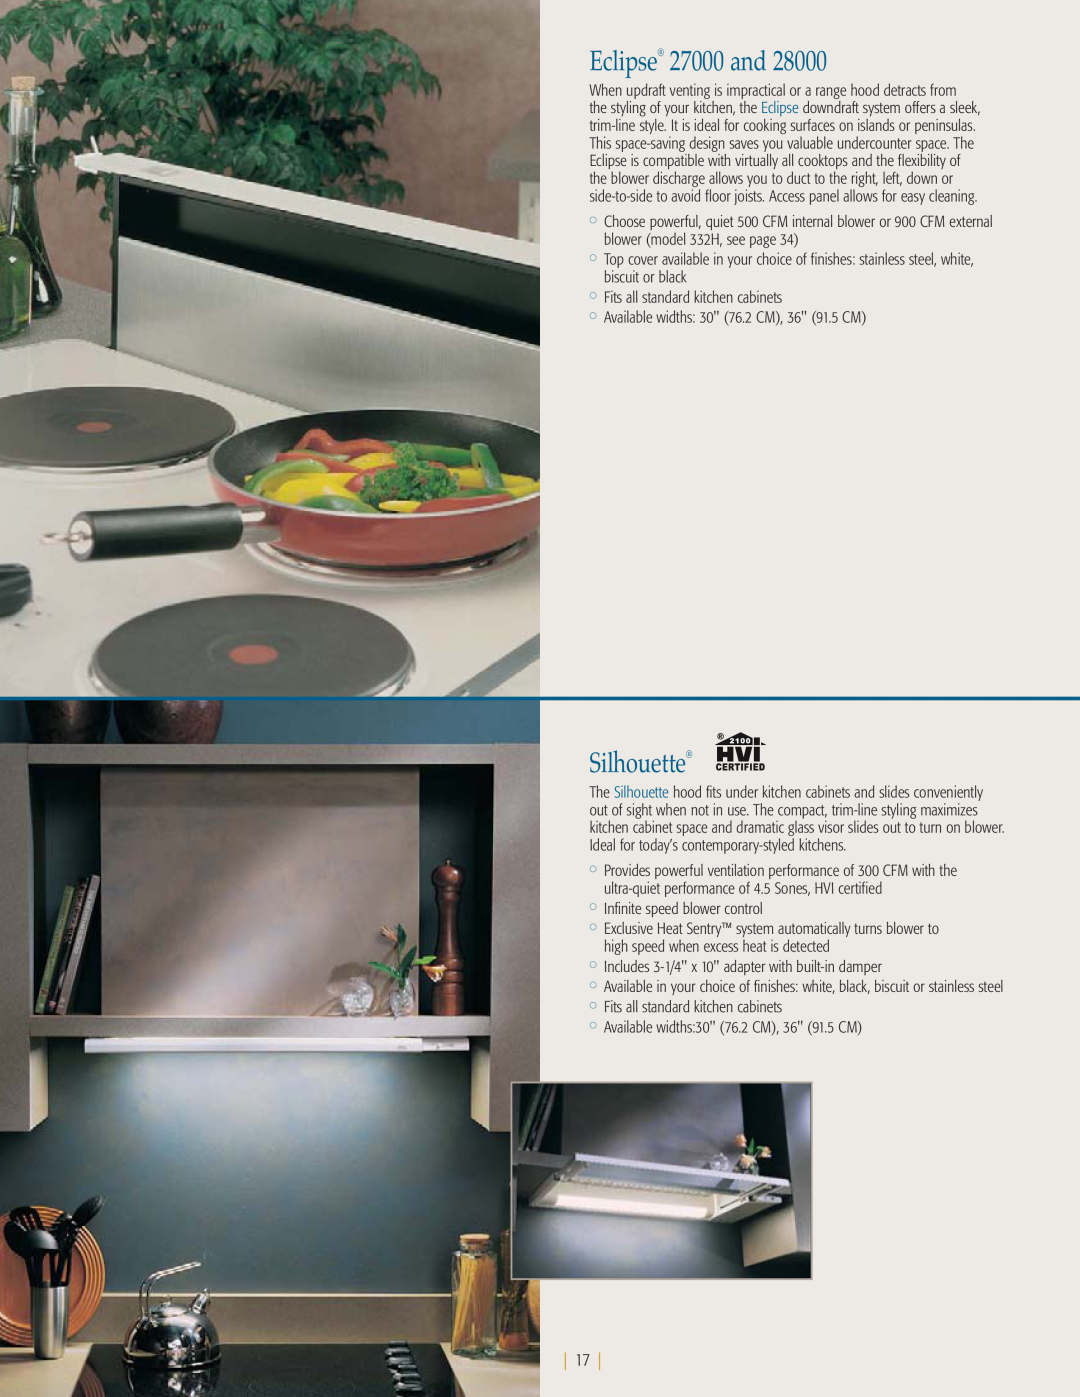 NuTone kitchen ventilation manual Eclipse 27000 and, Silhouette 